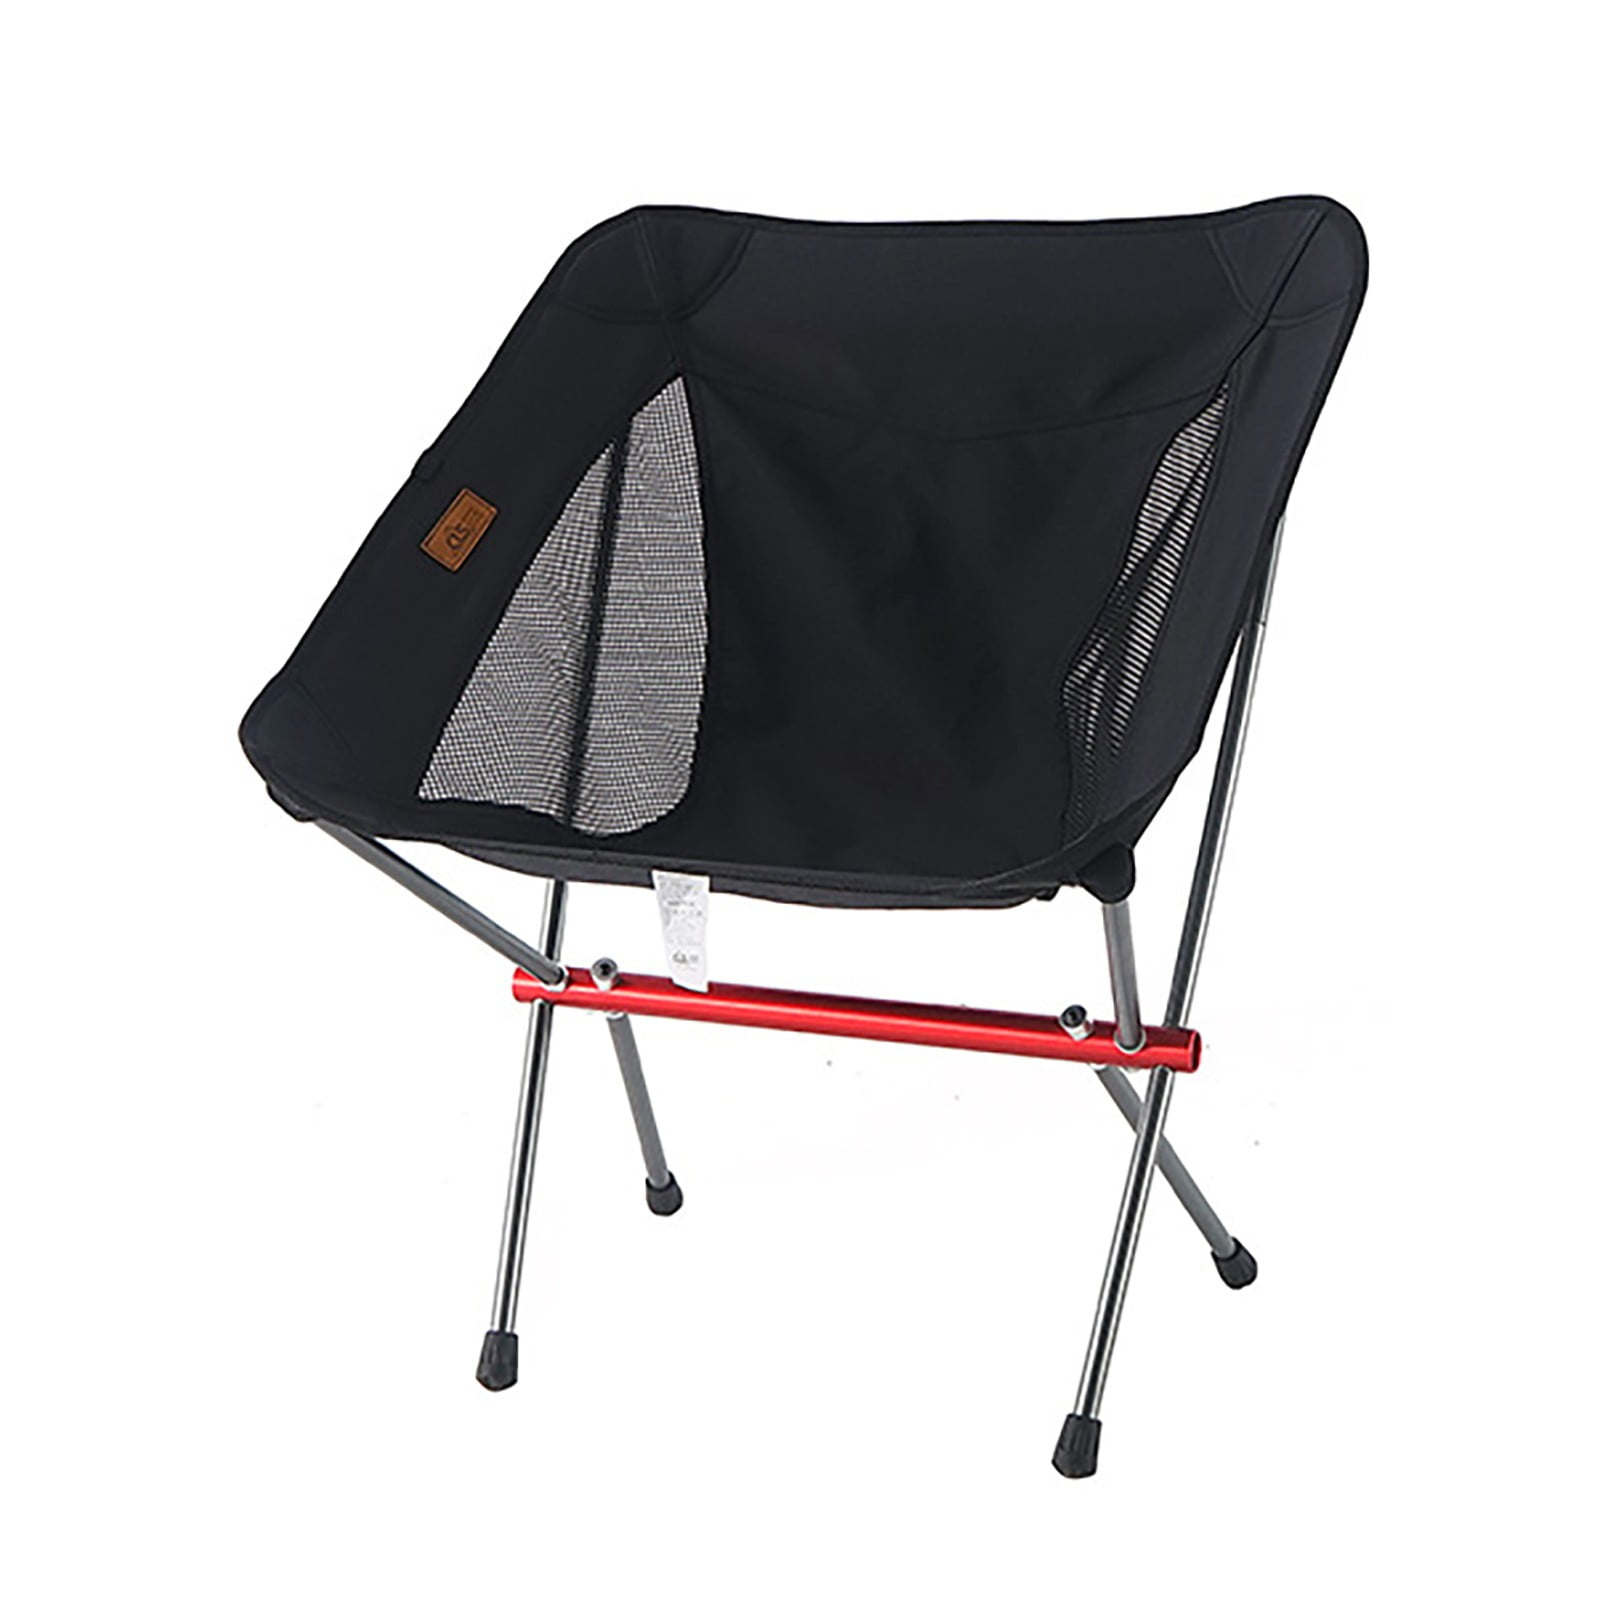 Portable Camping Chair Compact Ultralight Folding Backpacking Chairs Outdoor 